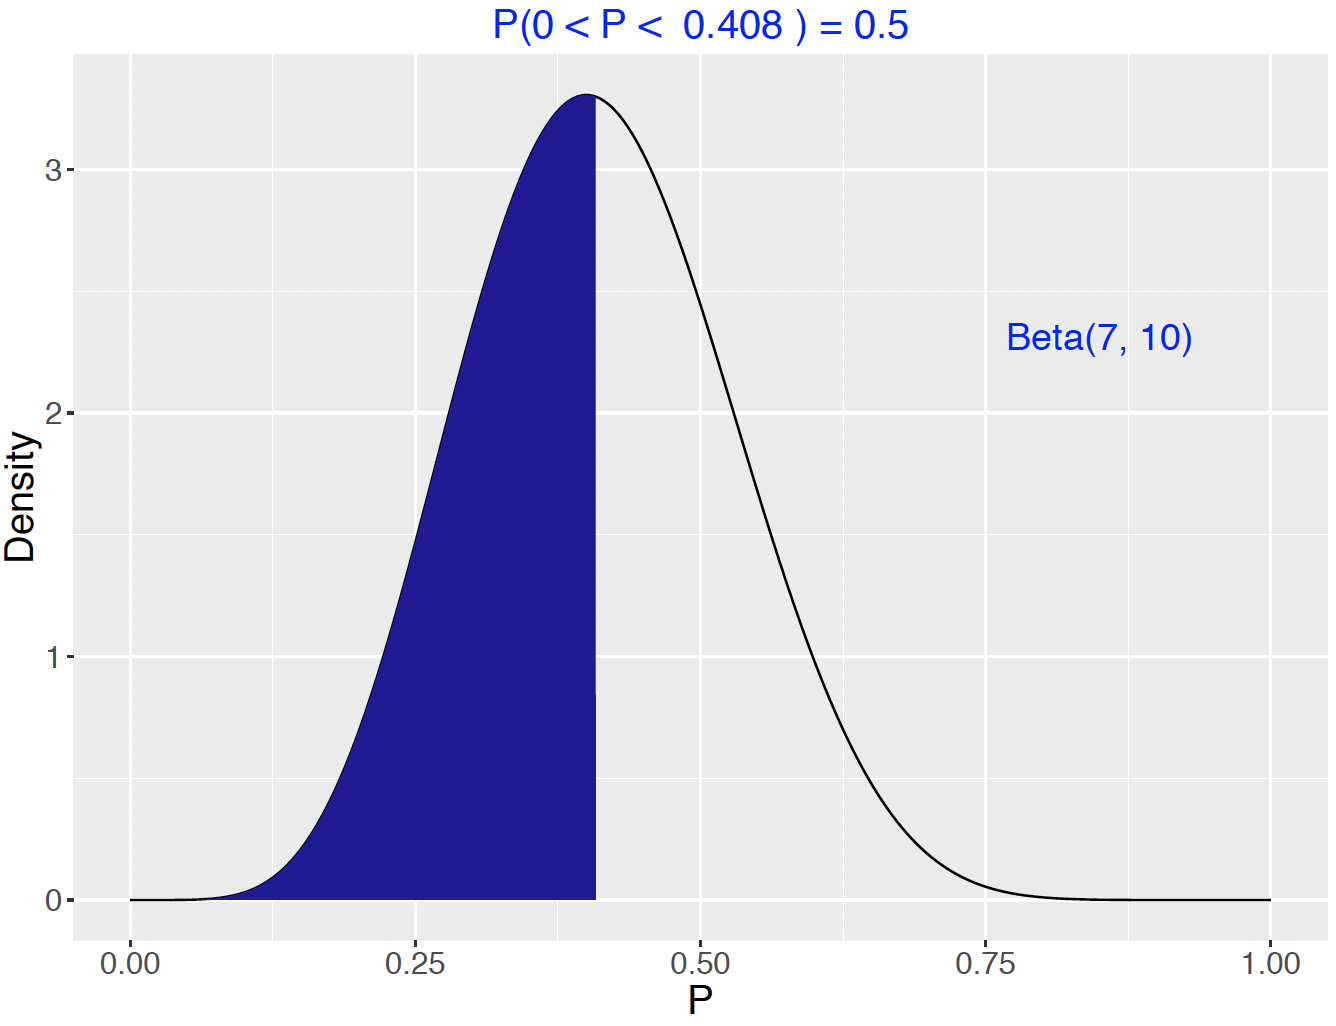 Illustration of a 0.5 quantile for a Beta(7, 10) variable.